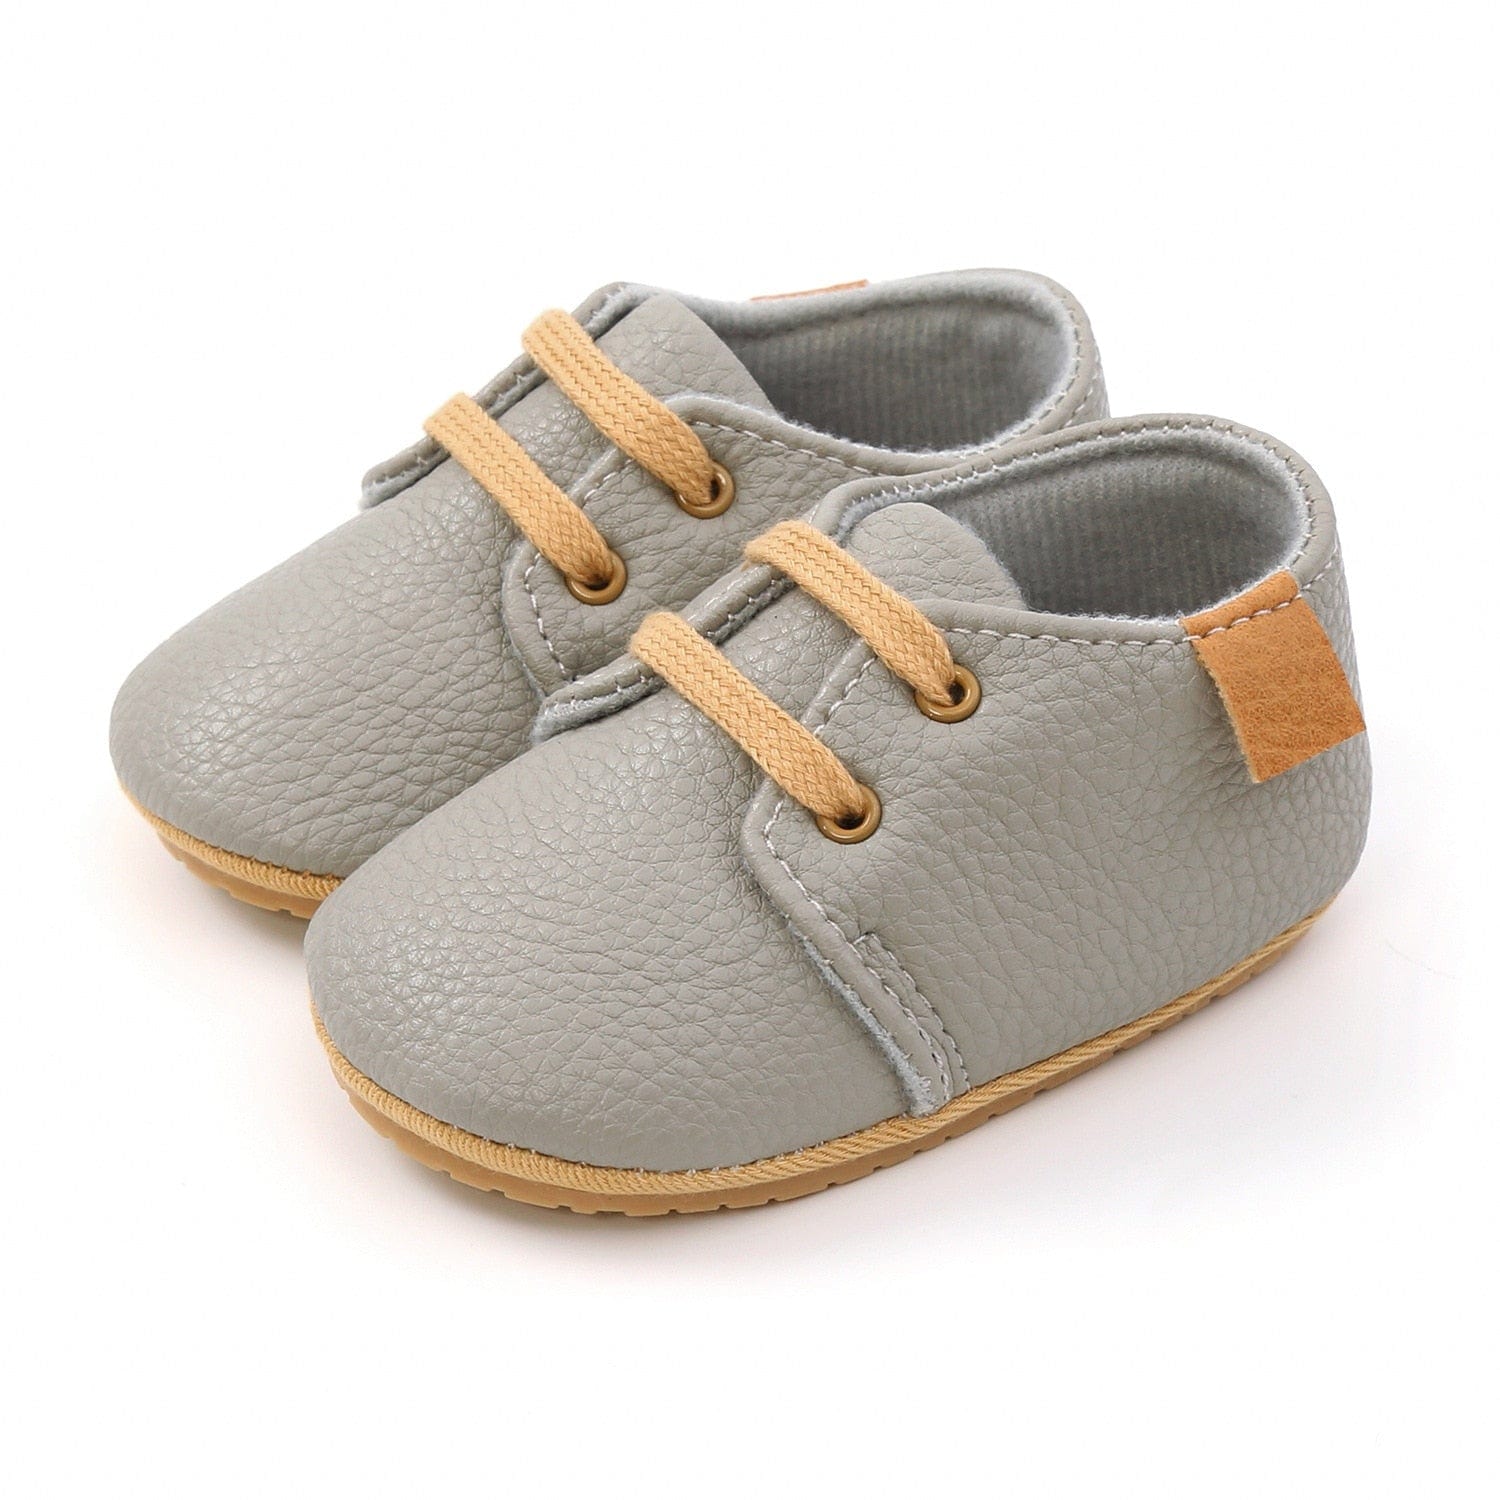 Proactive Baby Gray / 0-6 Months NewBaby Retro Leather Baby Shoes With Rubber Sole Best First Walkers For Newborn/Infant